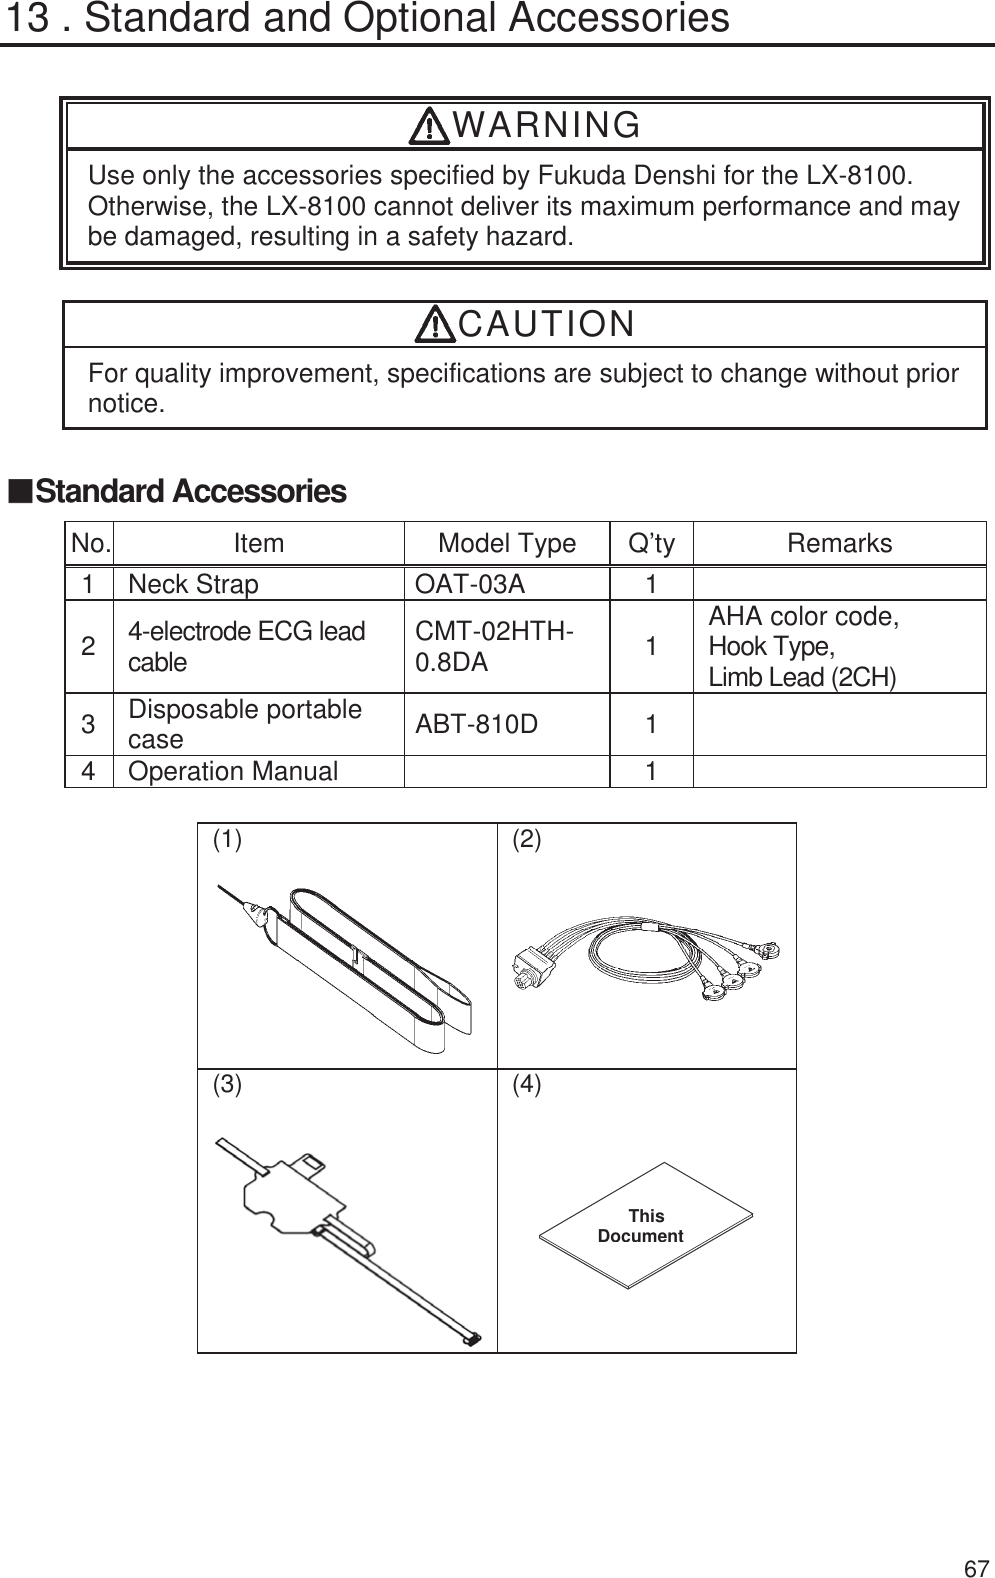  67 13 . Standard and Optional Accessories  WARNING Use only the accessories specified by Fukuda Denshi for the LX-8100. Otherwise, the LX-8100 cannot deliver its maximum performance and may be damaged, resulting in a safety hazard.  CAUTION For quality improvement, specifications are subject to change without prior notice.  䕔Standard Accessories No. Item  Model Type Q’ty Remarks 1 Neck Strap  OAT-03A  1   2  4-electrode ECG lead cable  CMT-02HTH-0.8DA  1  AHA color code,   Hook Type,     Limb Lead (2CH) 3  Disposable portable case  ABT-810D 1   4 Operation Manual    1   (1)  (2)   (3) (4)    㻌This Document